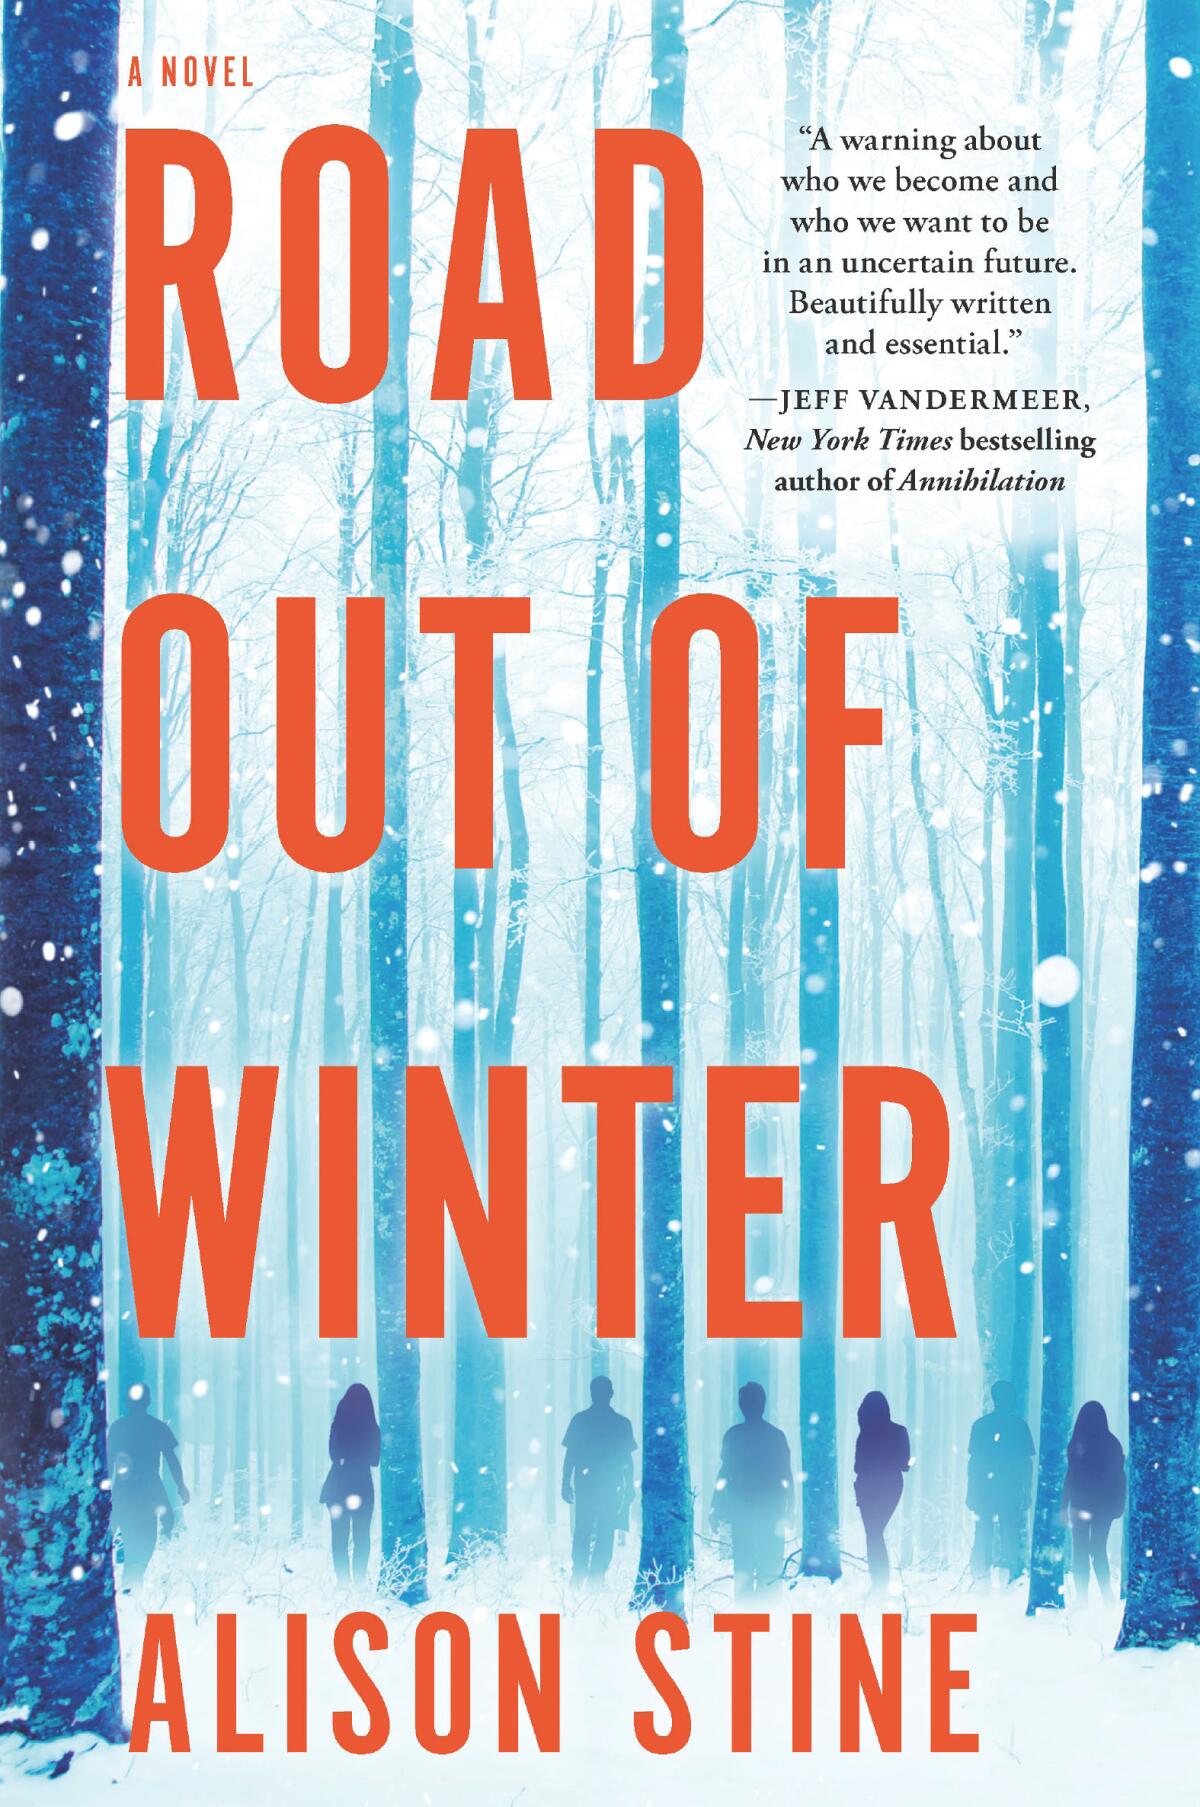 "Road Out of Winter" by Alison Stine.